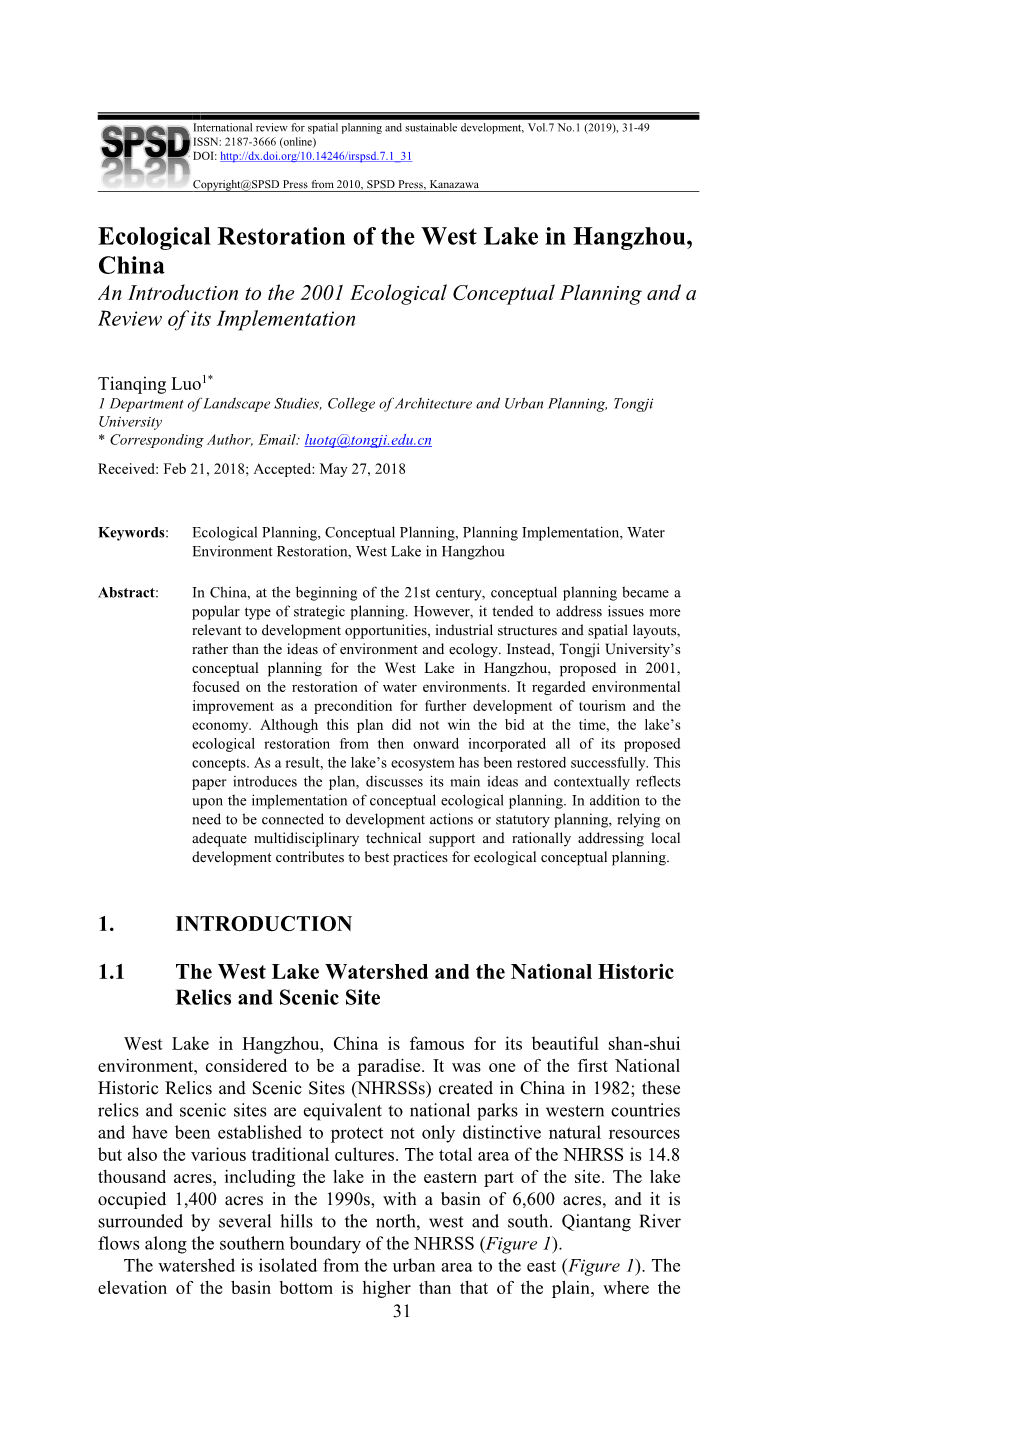 Ecological Restoration of the West Lake in Hangzhou, China an Introduction to the 2001 Ecological Conceptual Planning and a Review of Its Implementation